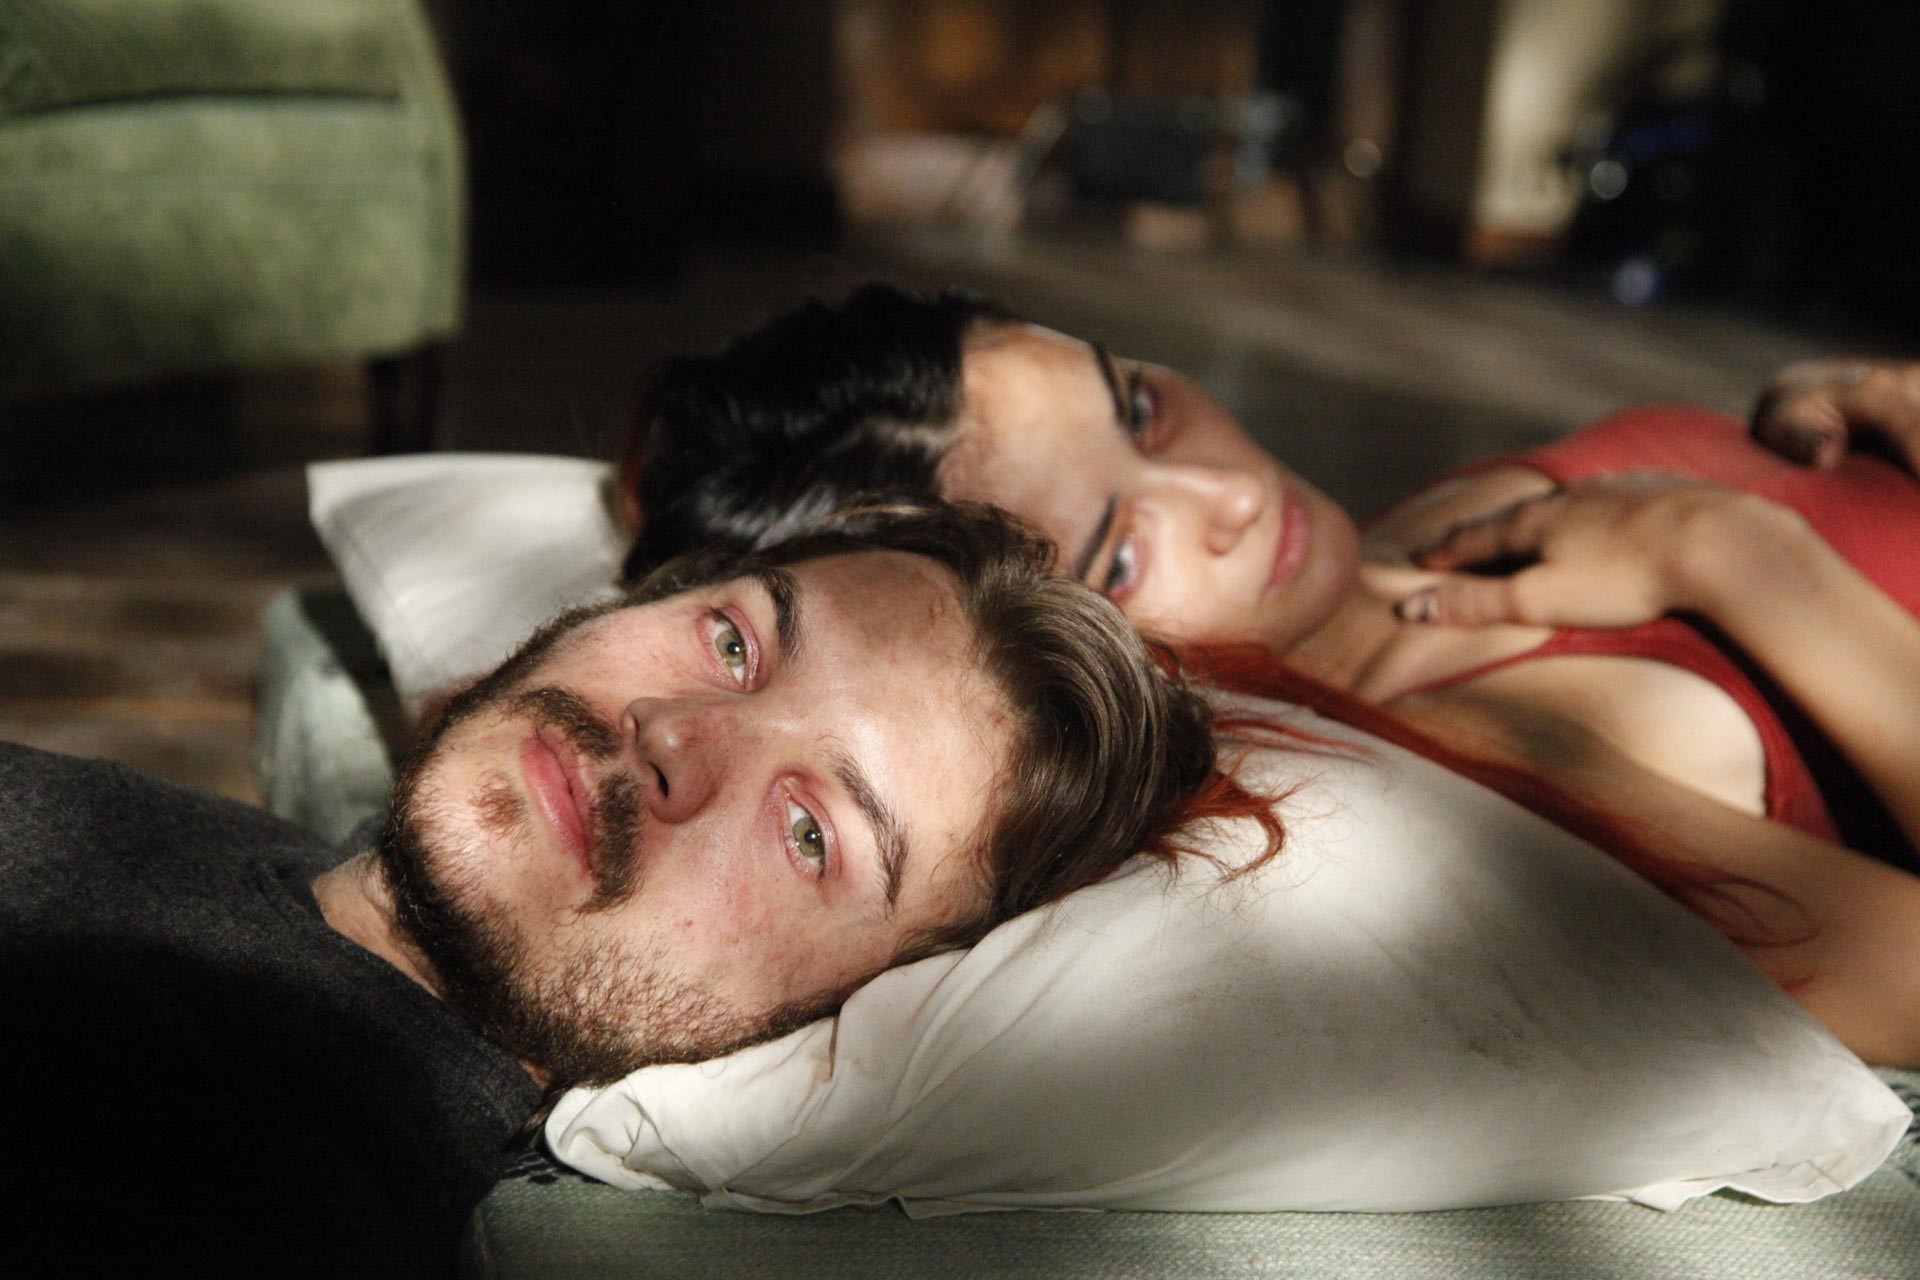 Emile Hirsch stars as Diego and Saadet Aksoy stars as Aska in Entertainment One's Twice Born (2013)